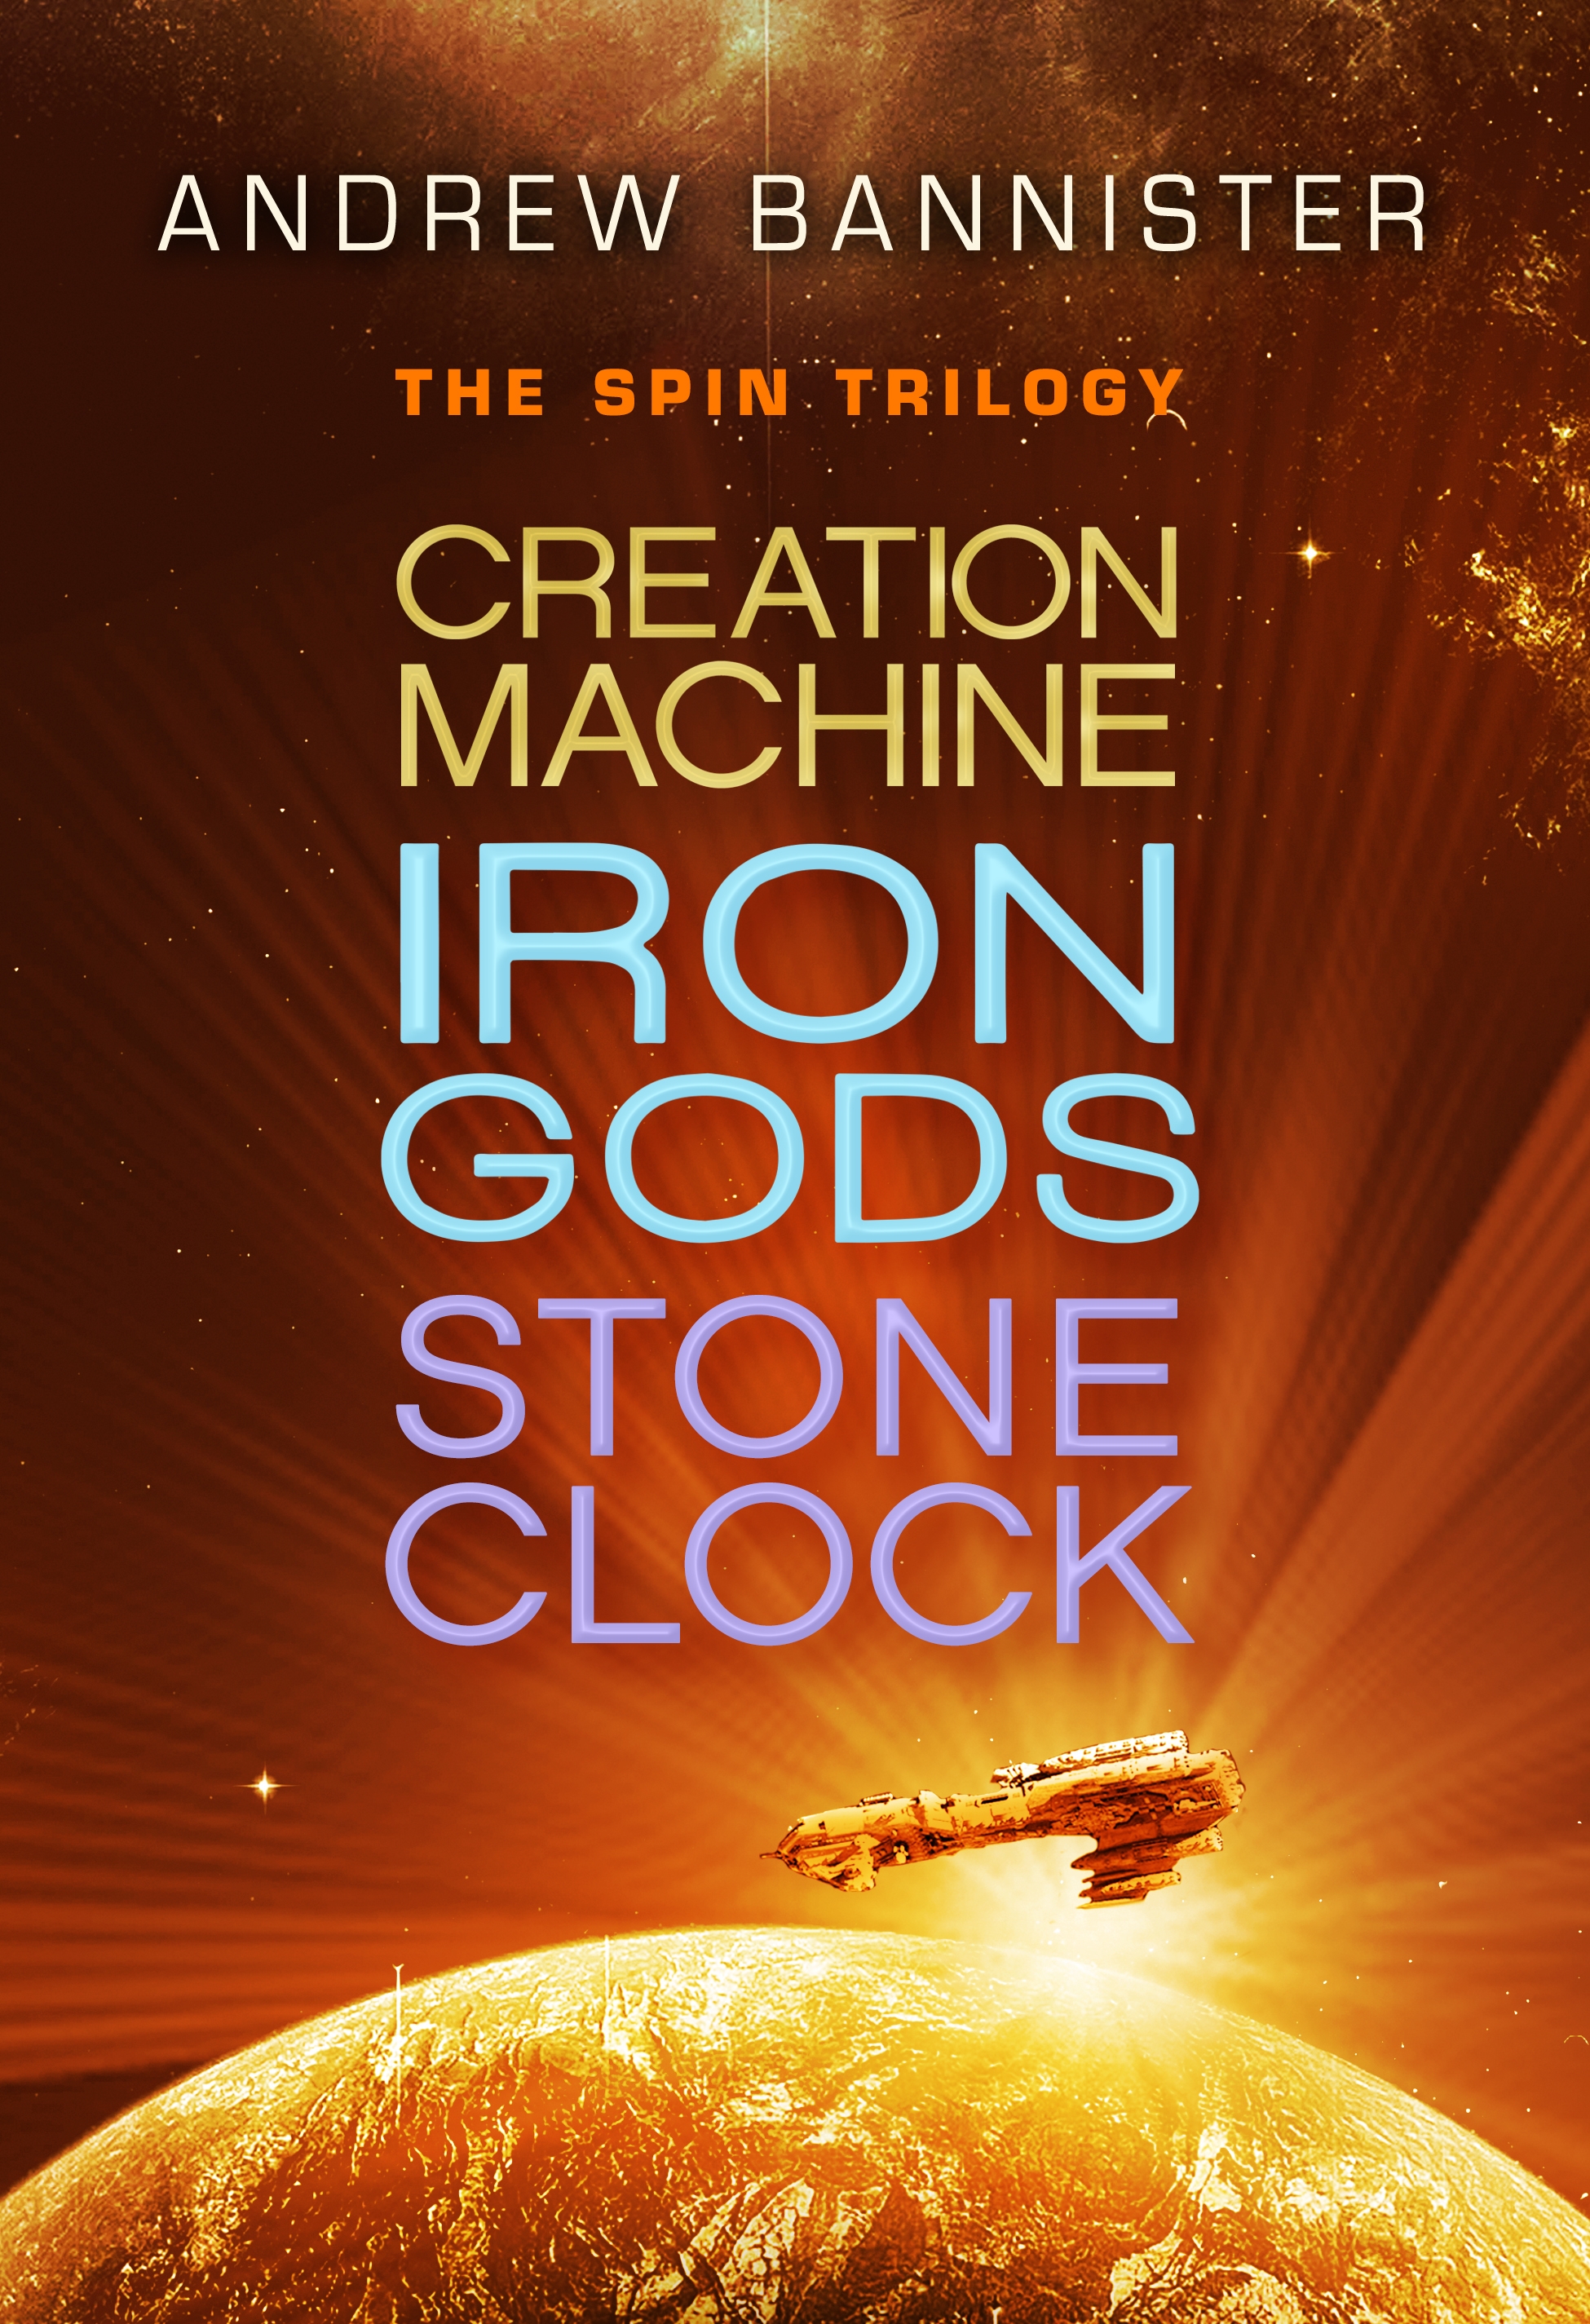 The Spin Trilogy : Creation Machine, Iron Gods, Stone Clock by Andrew Bannister